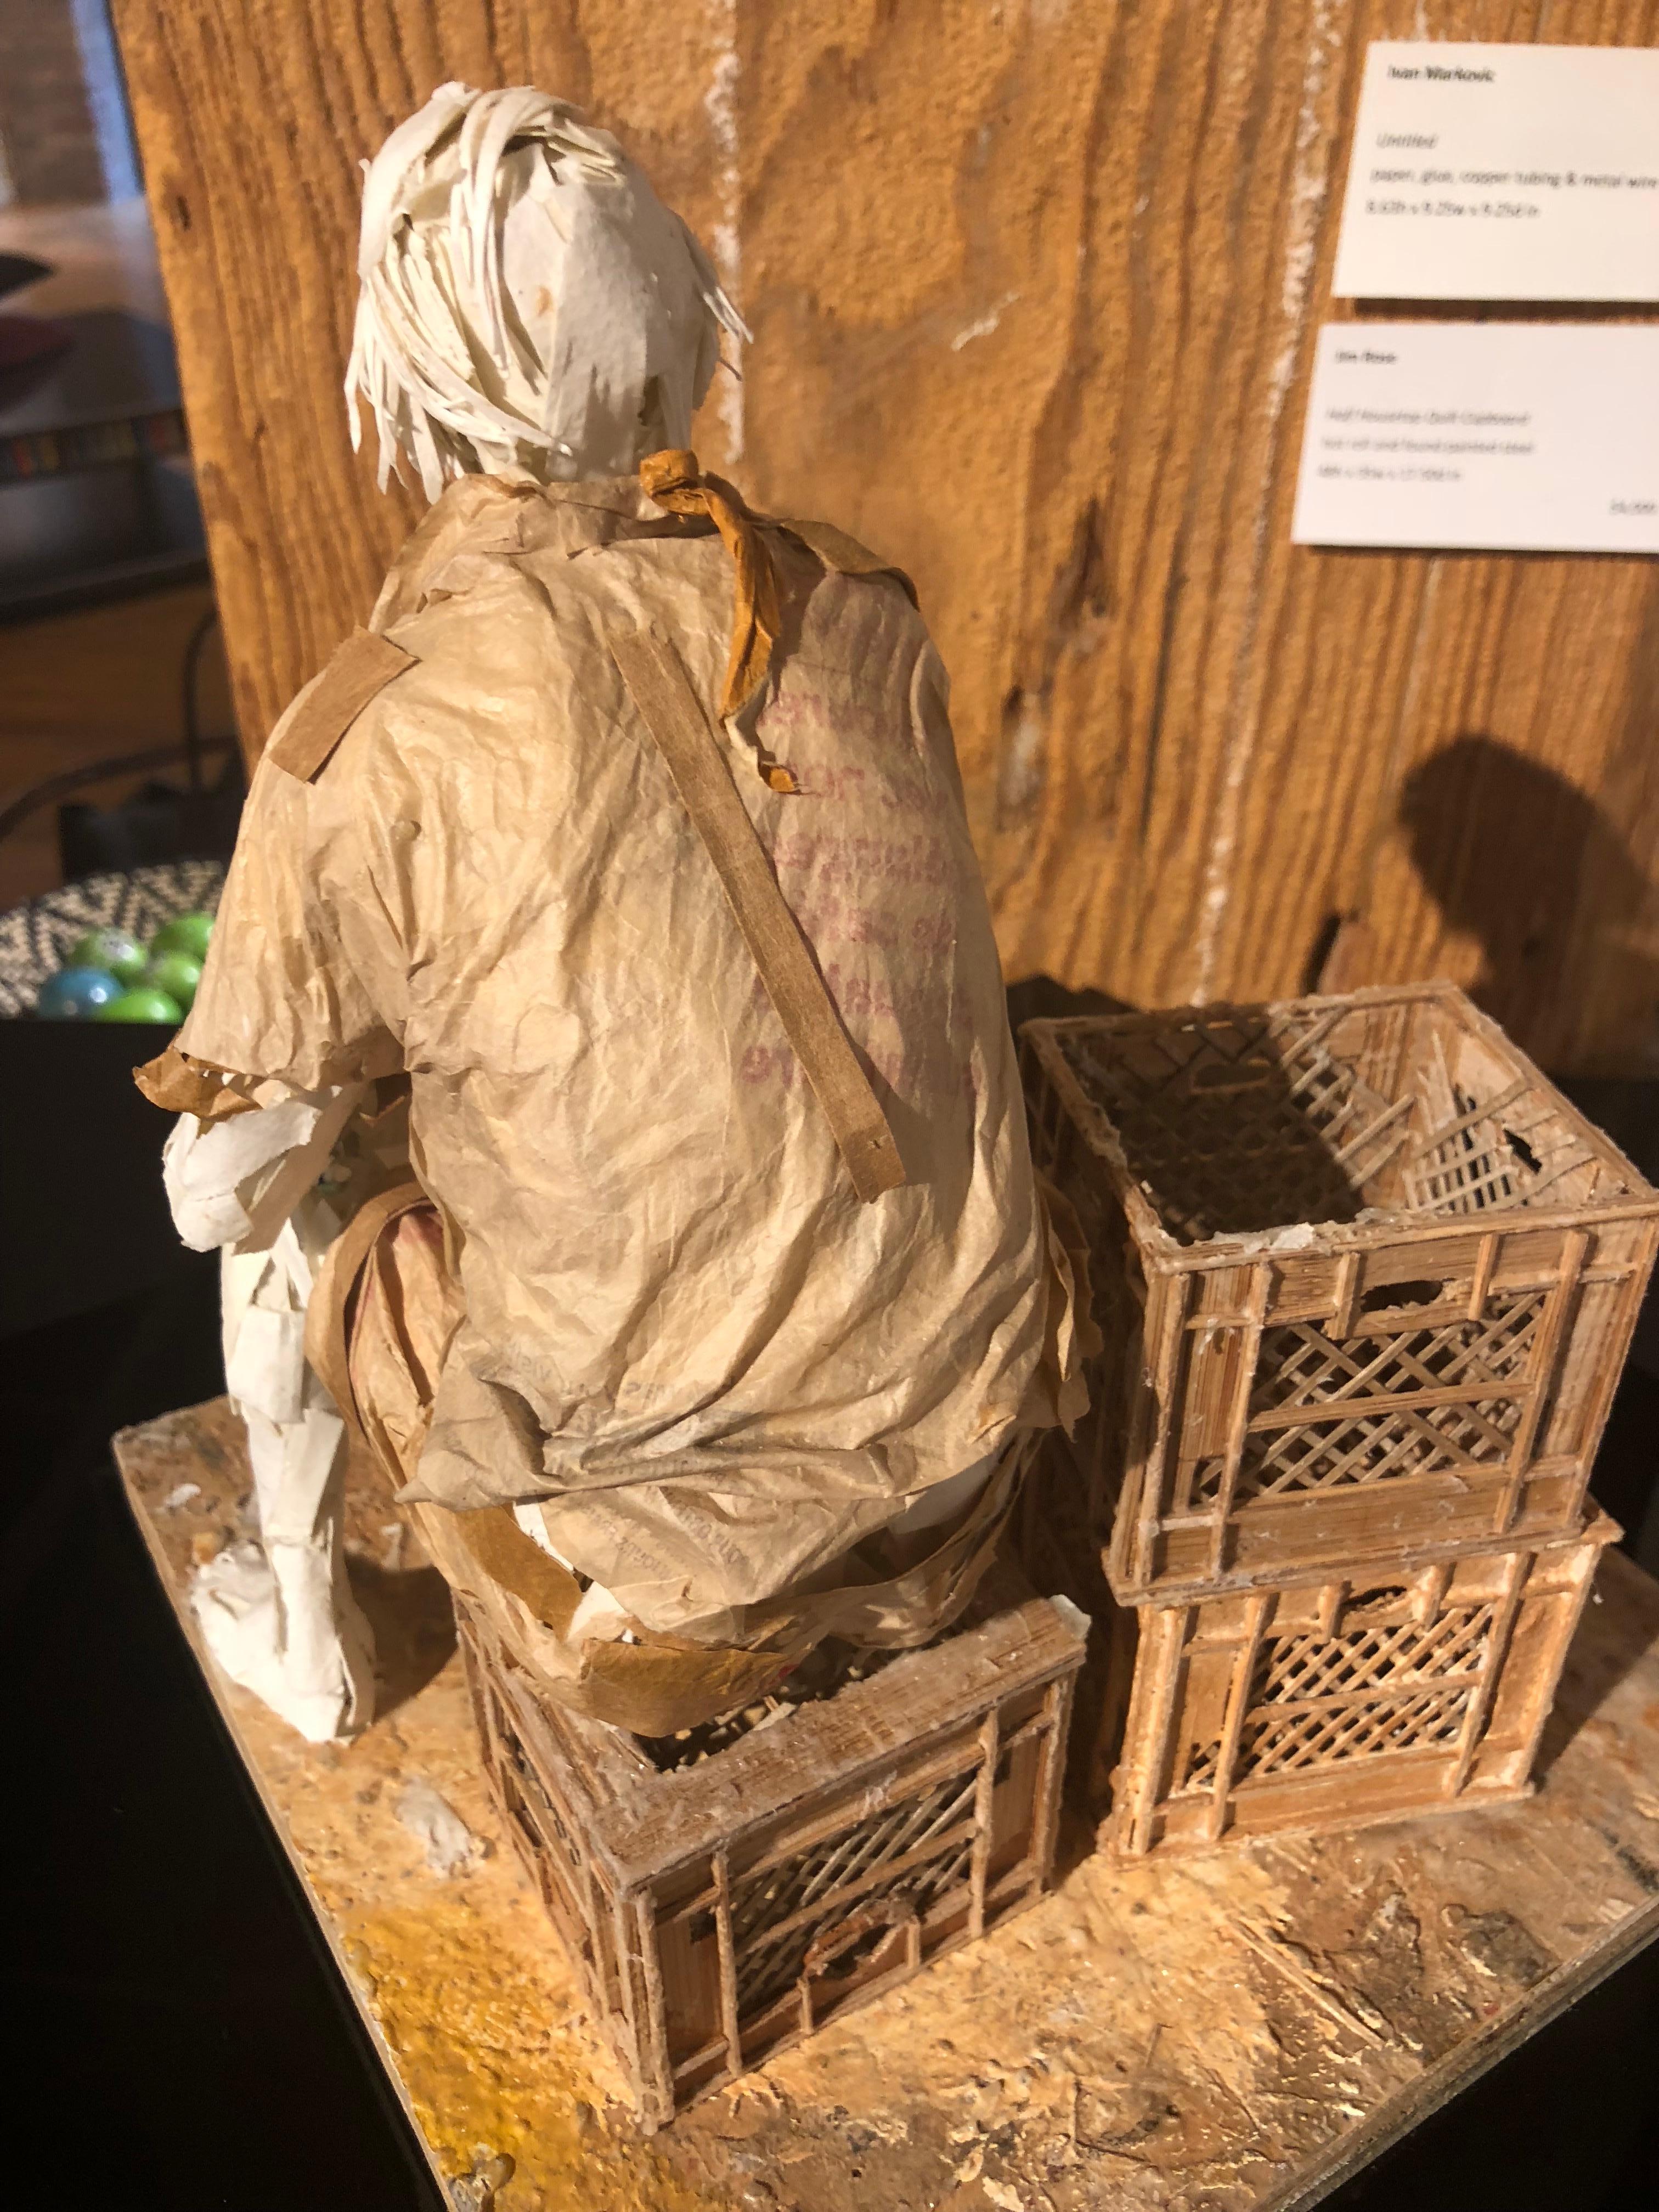 Man with Dog - Highly Detailed Sculpture Made of Paper, Glue, Wire, and Wood 1